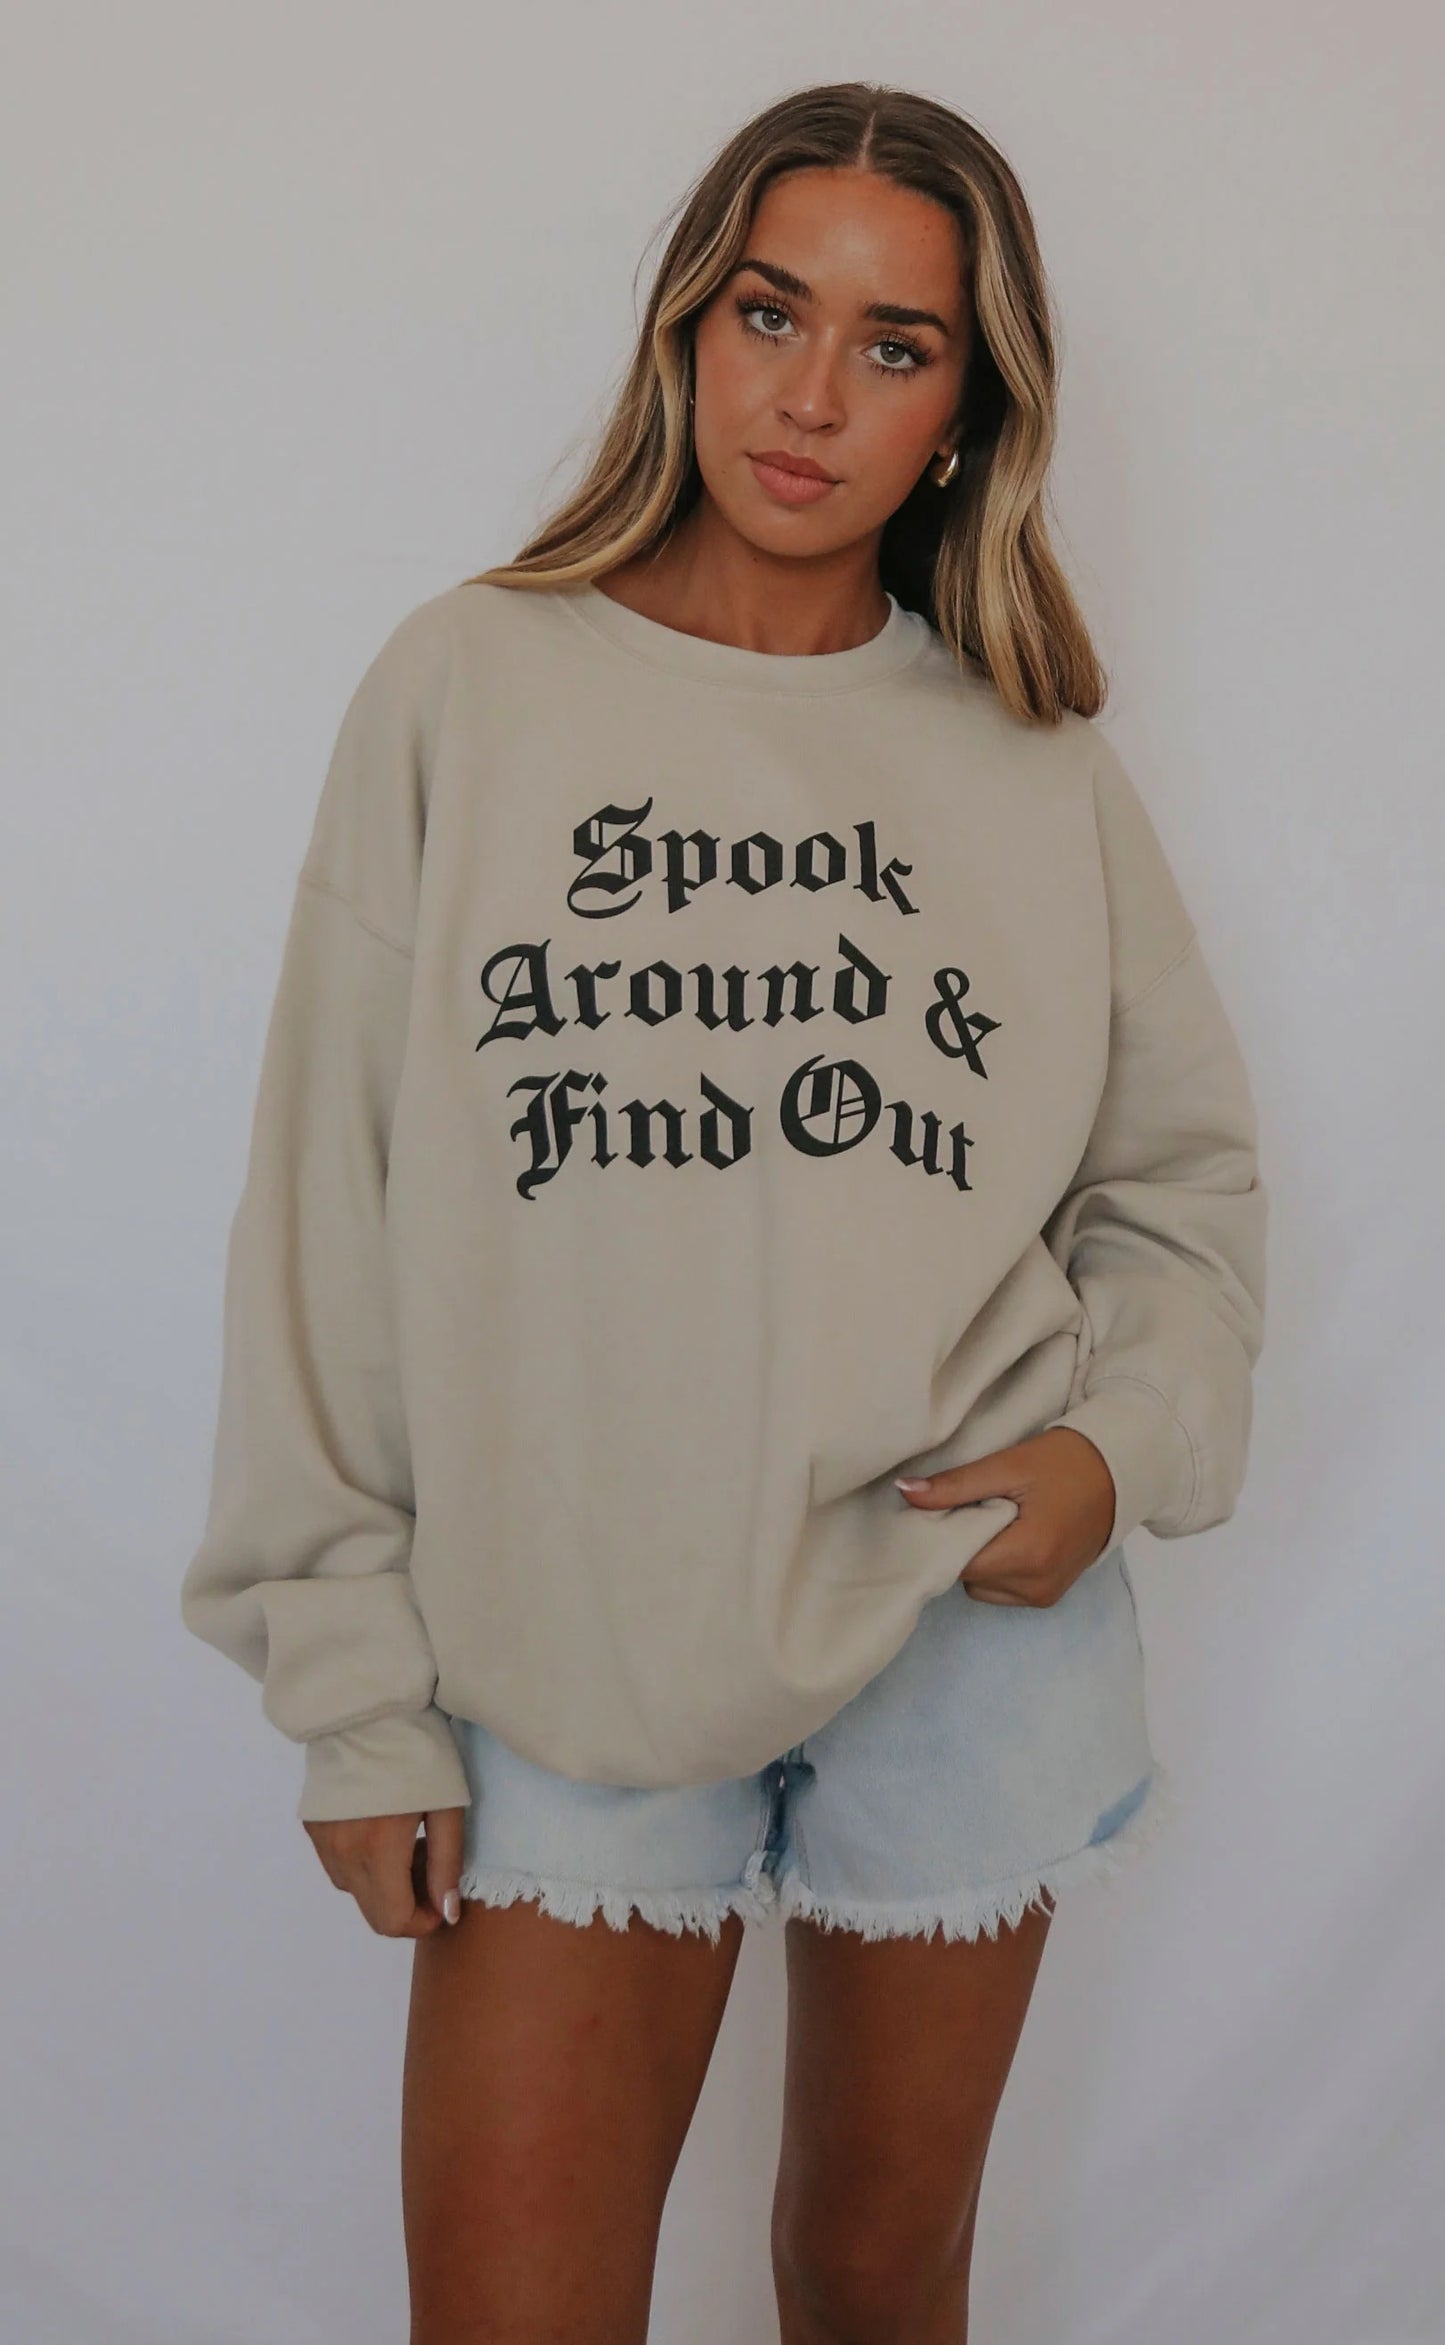 Tan Sweatshirt With Spook Around & Find Out On Front